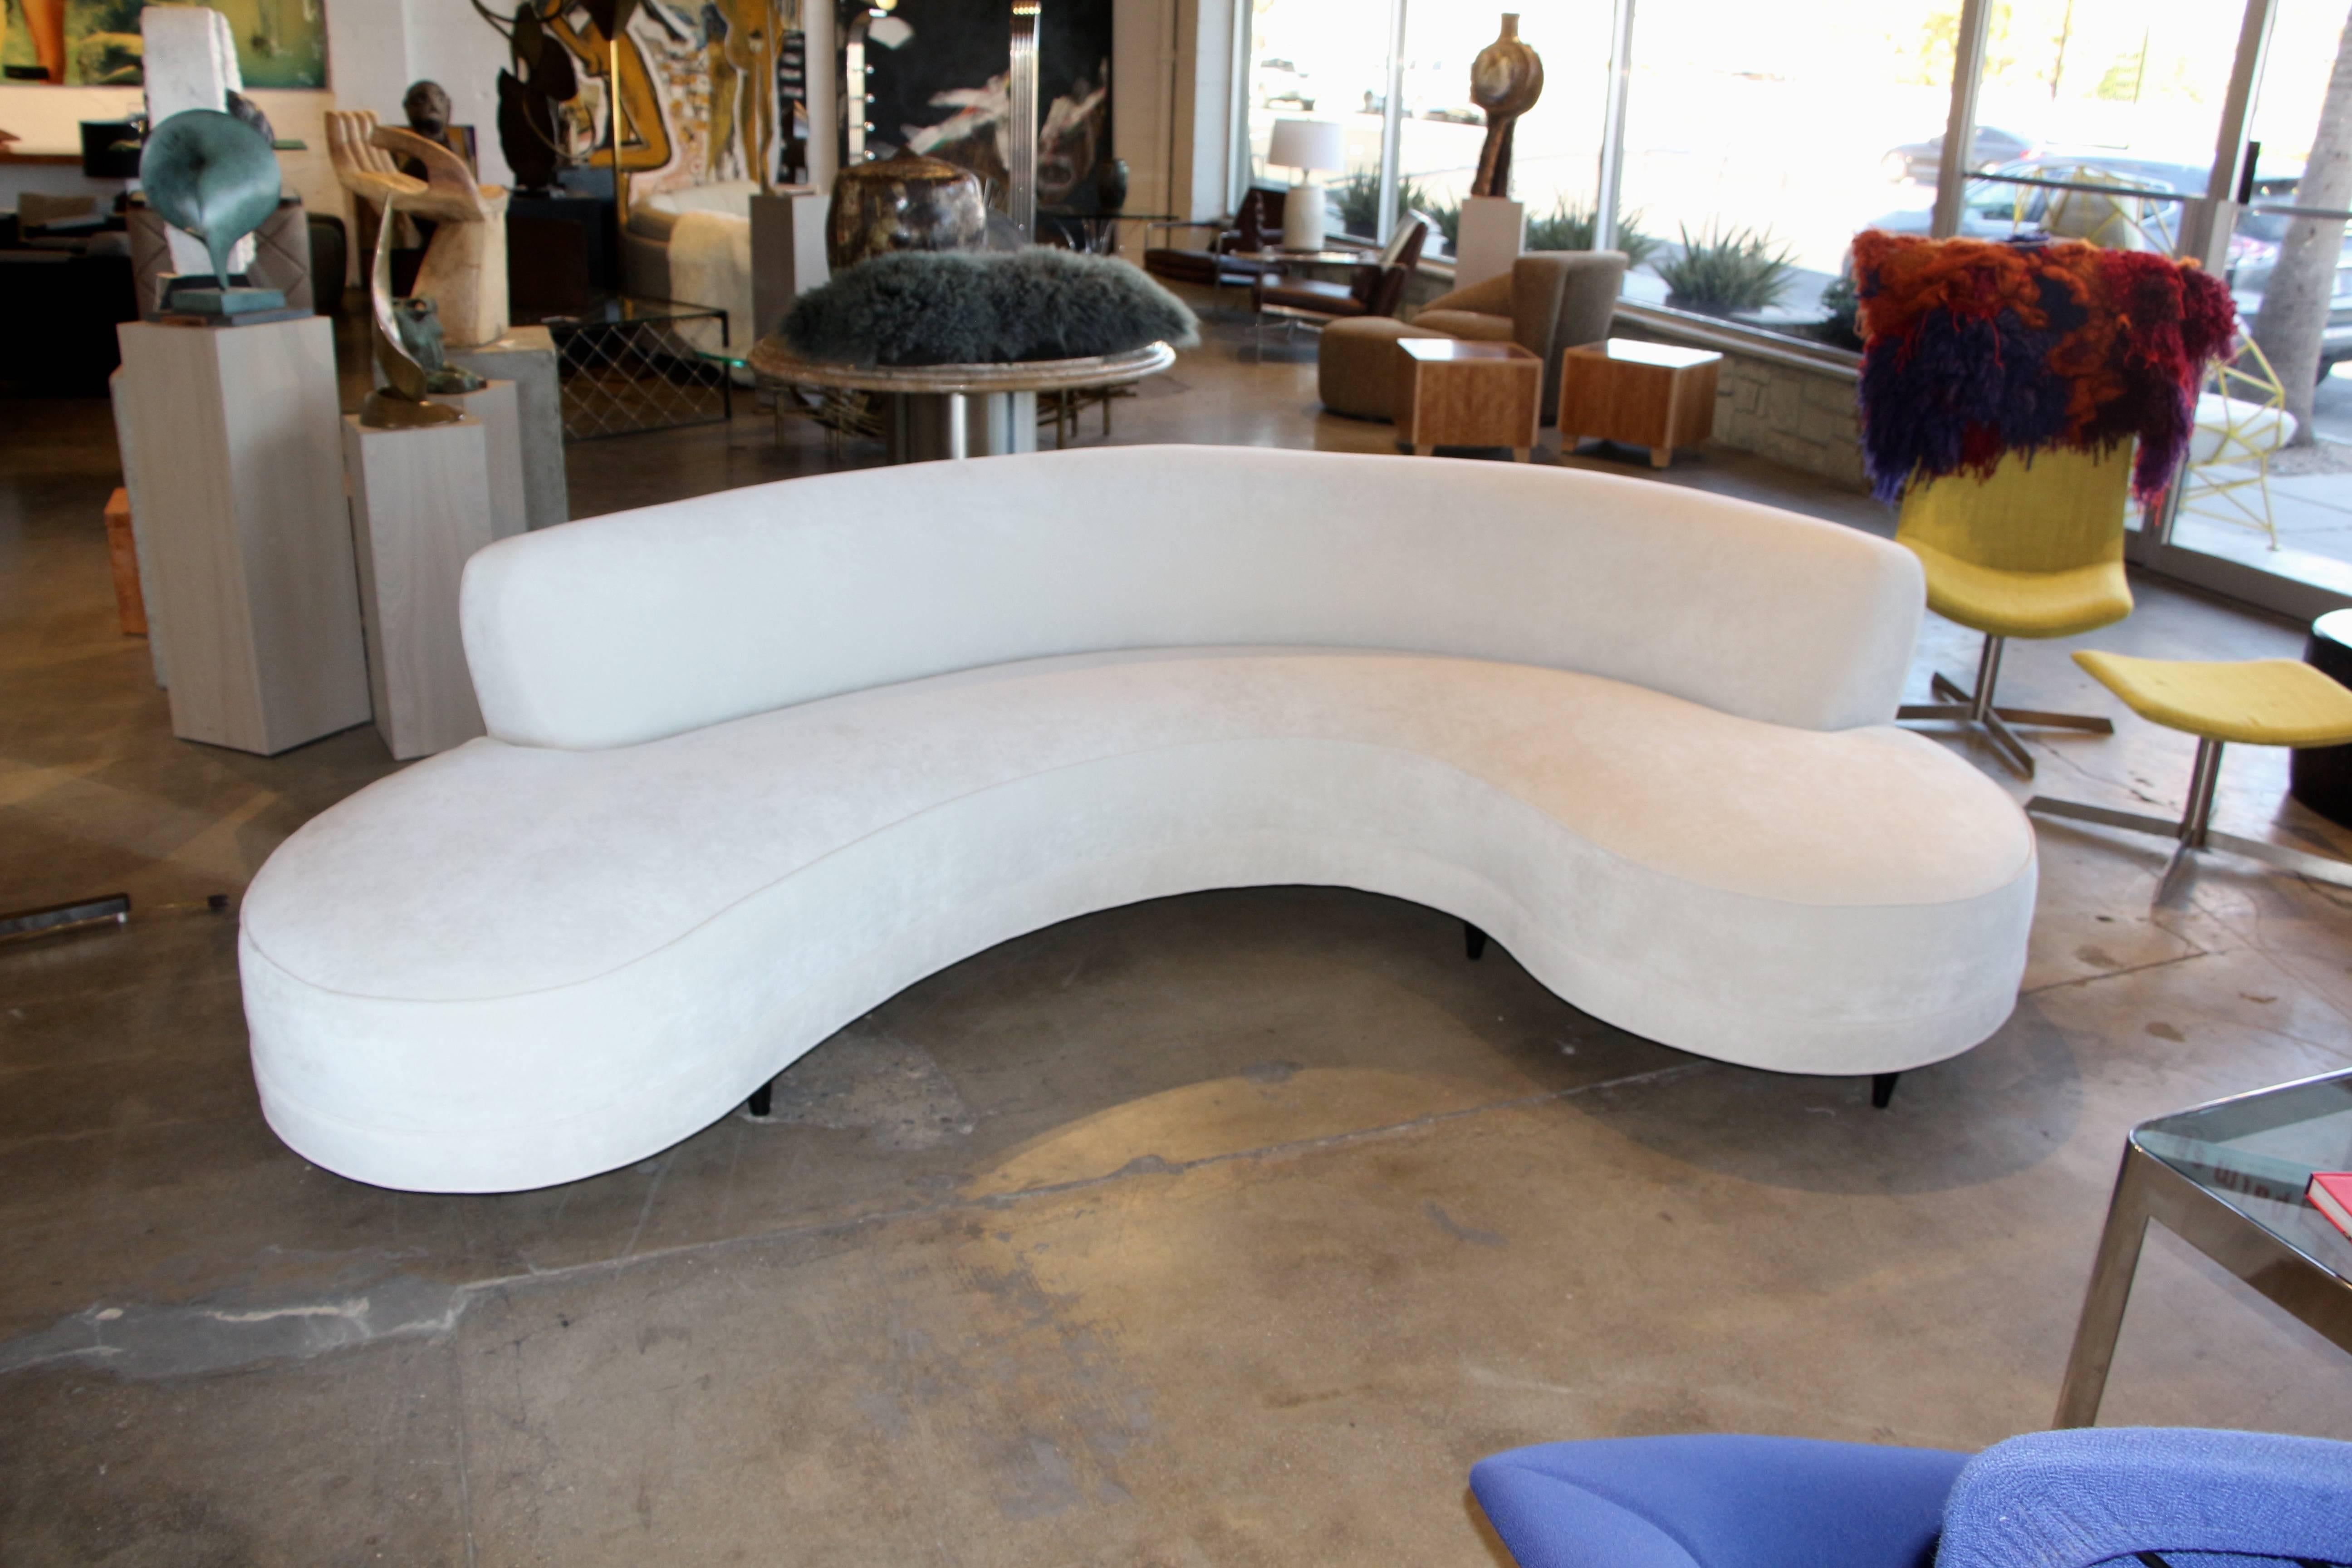 A beautiful Kagan Dreyfuss Serpentine sofa that was in an old time palm springs hotel. We have had it reupholstered and redone. It has a great circular shape. It sits on walnut legs that have been painted black. A very sexy sofa. the back has a